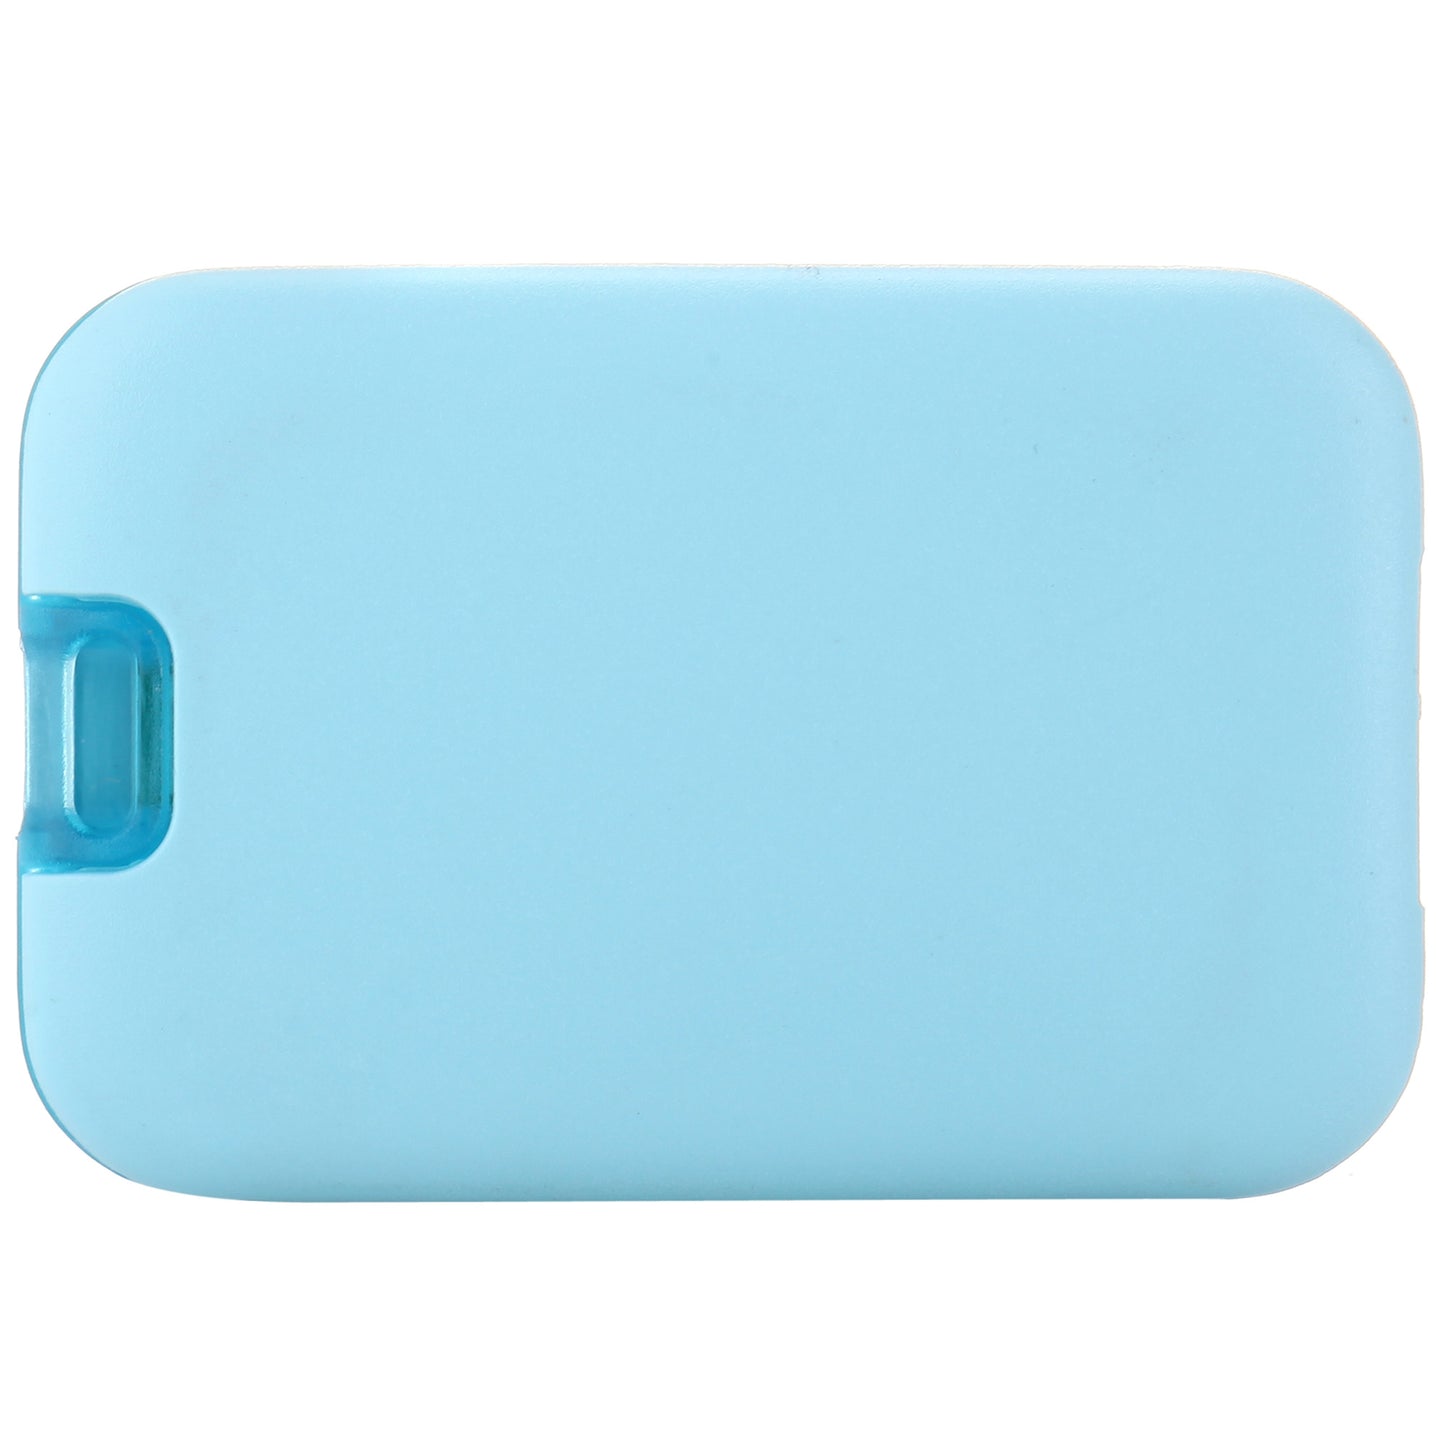 Nut mini (F6)- Small Bluetooth tracker, replaceable battery. Blue